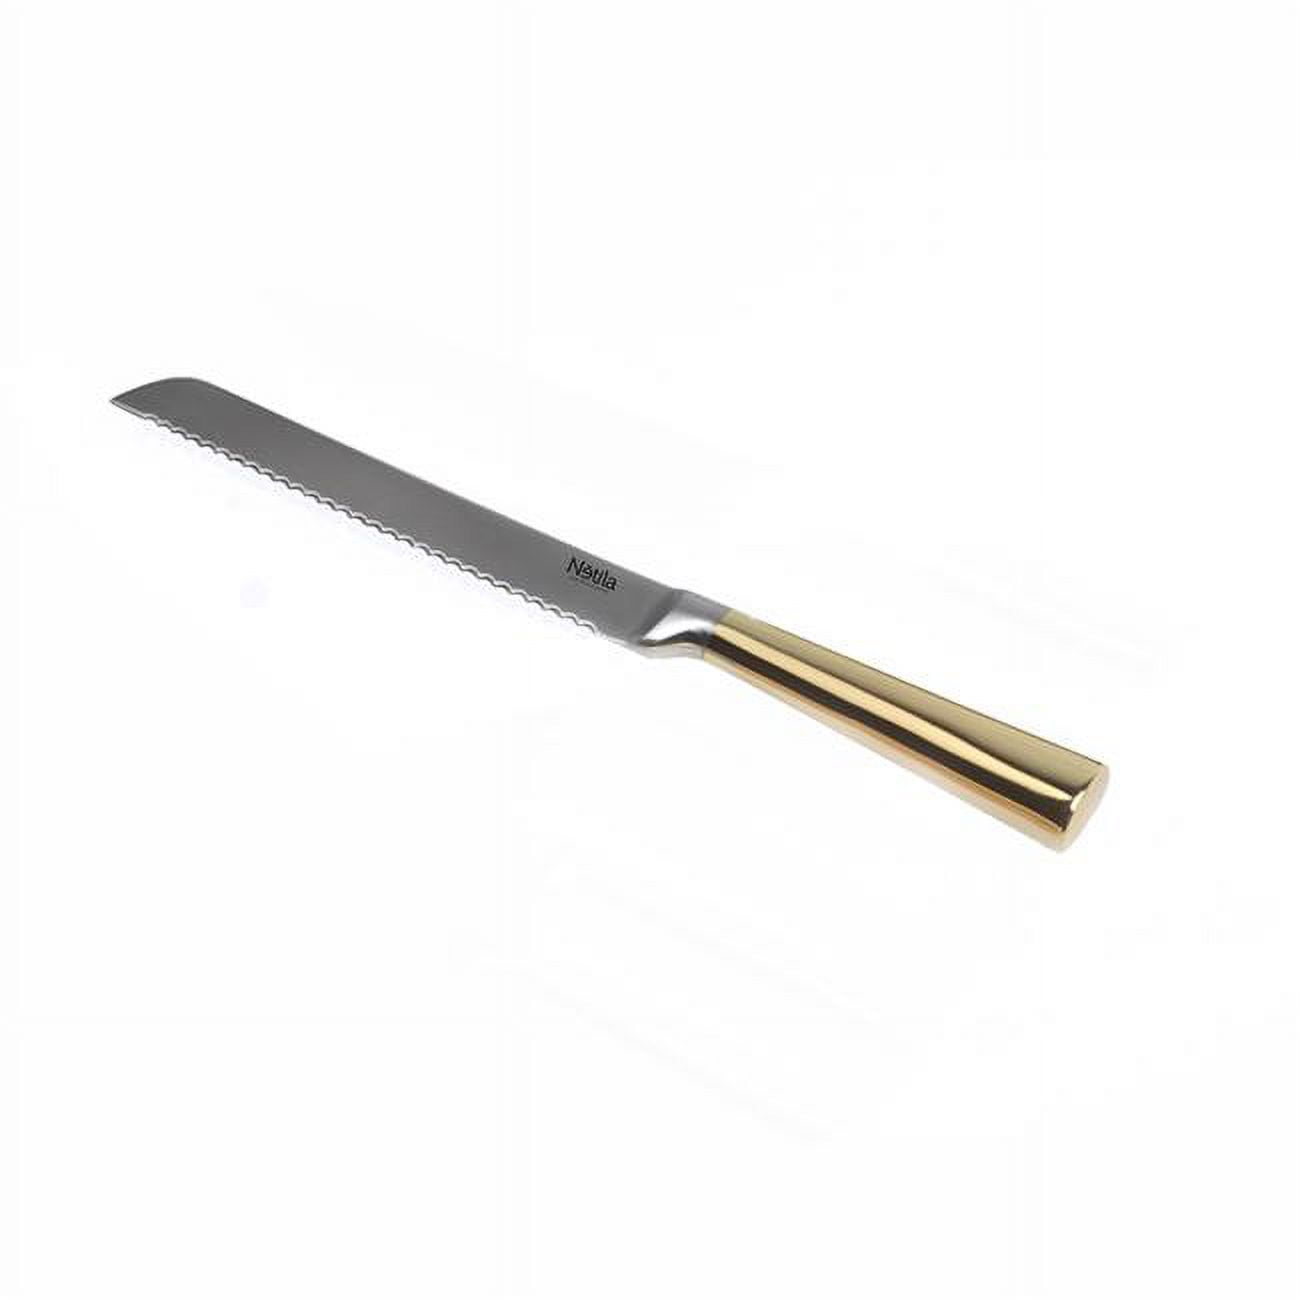 Picture of Elygant 58297 13 in. Non Serrated Stainless Steel Knife with Gold Handle